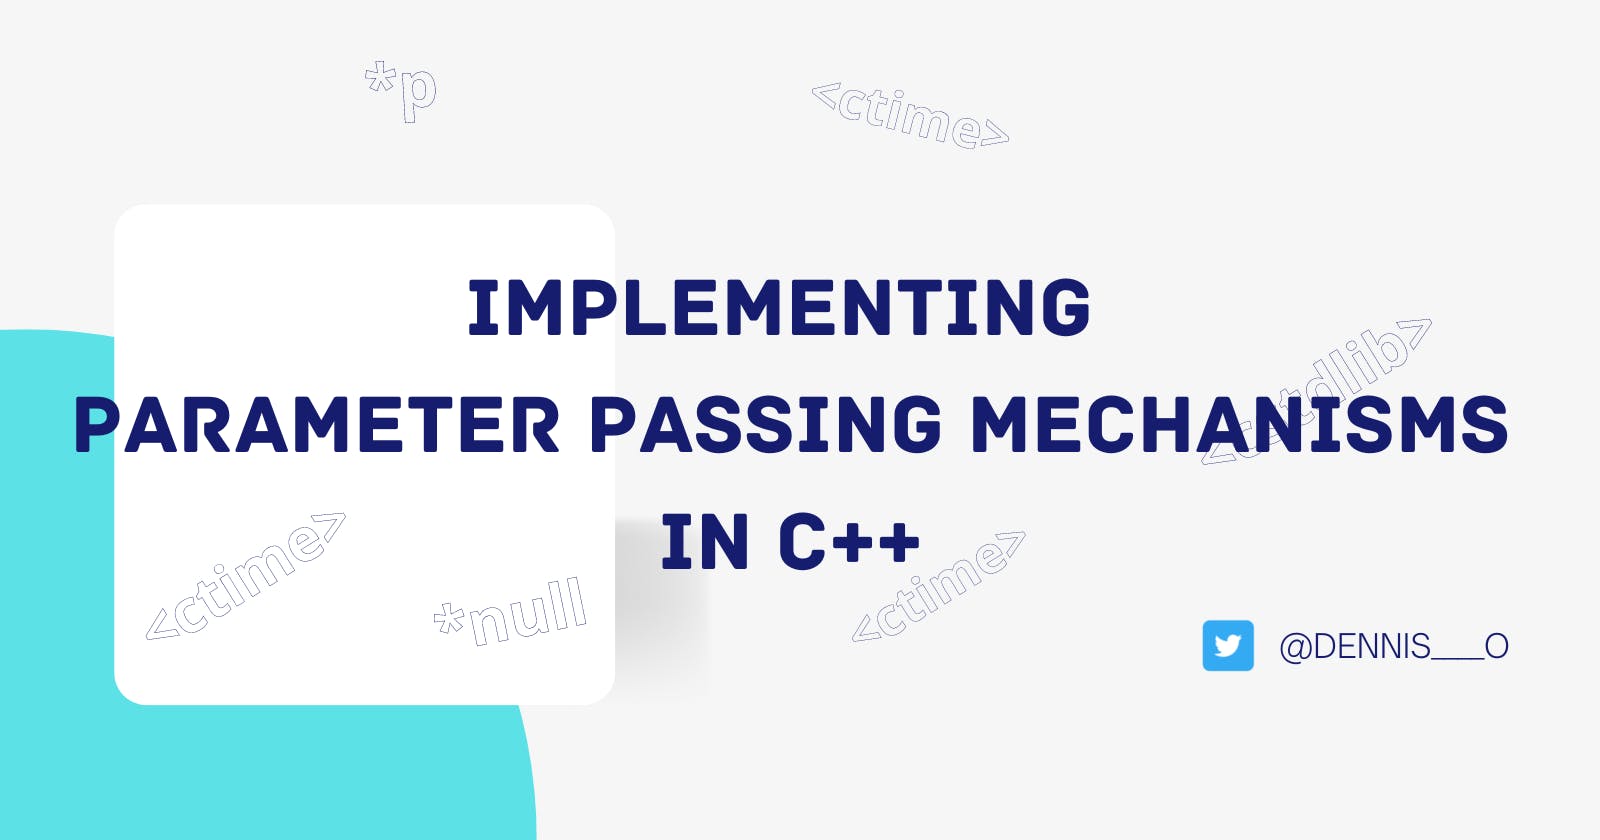 Implementing parameter passing mechanisms in C++